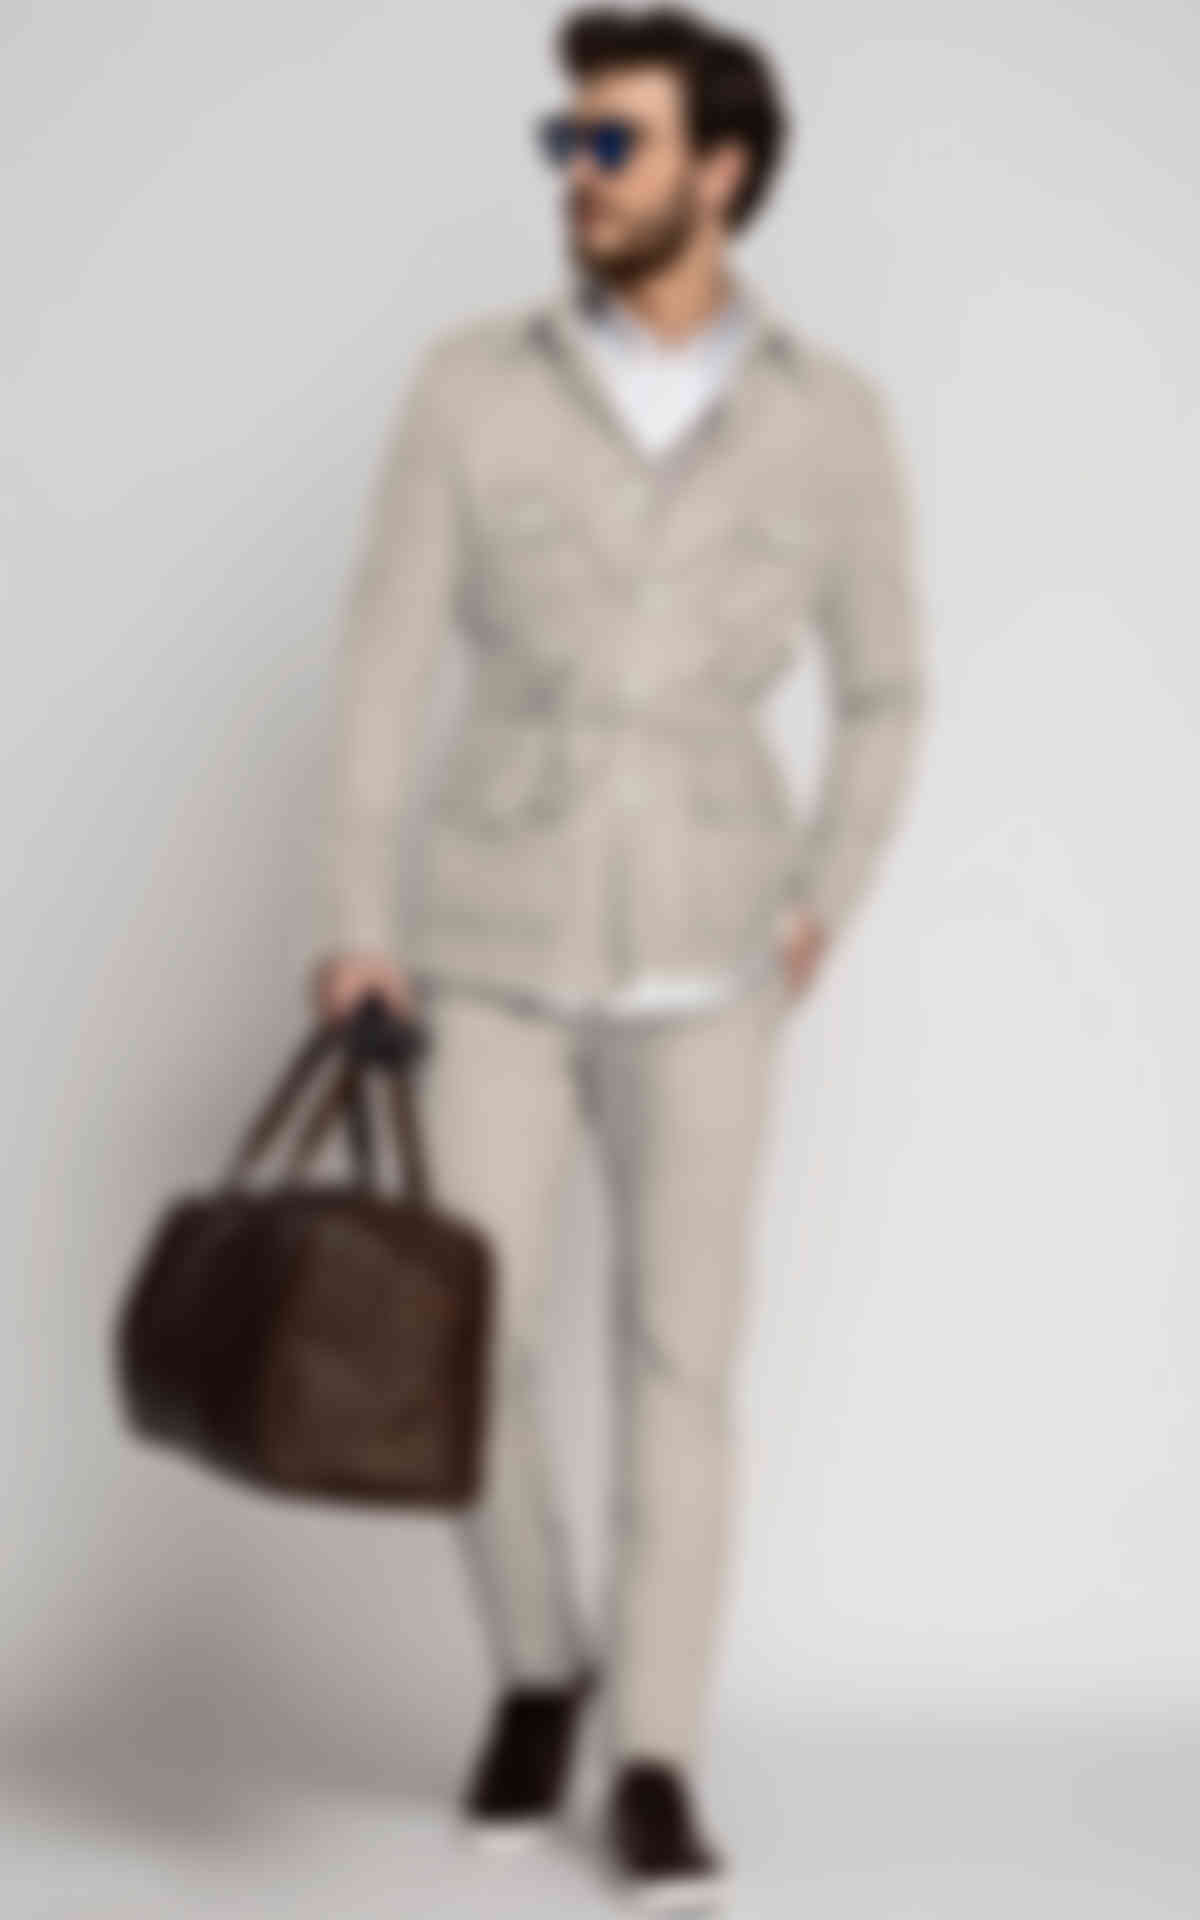 Muted Beige Military Suit